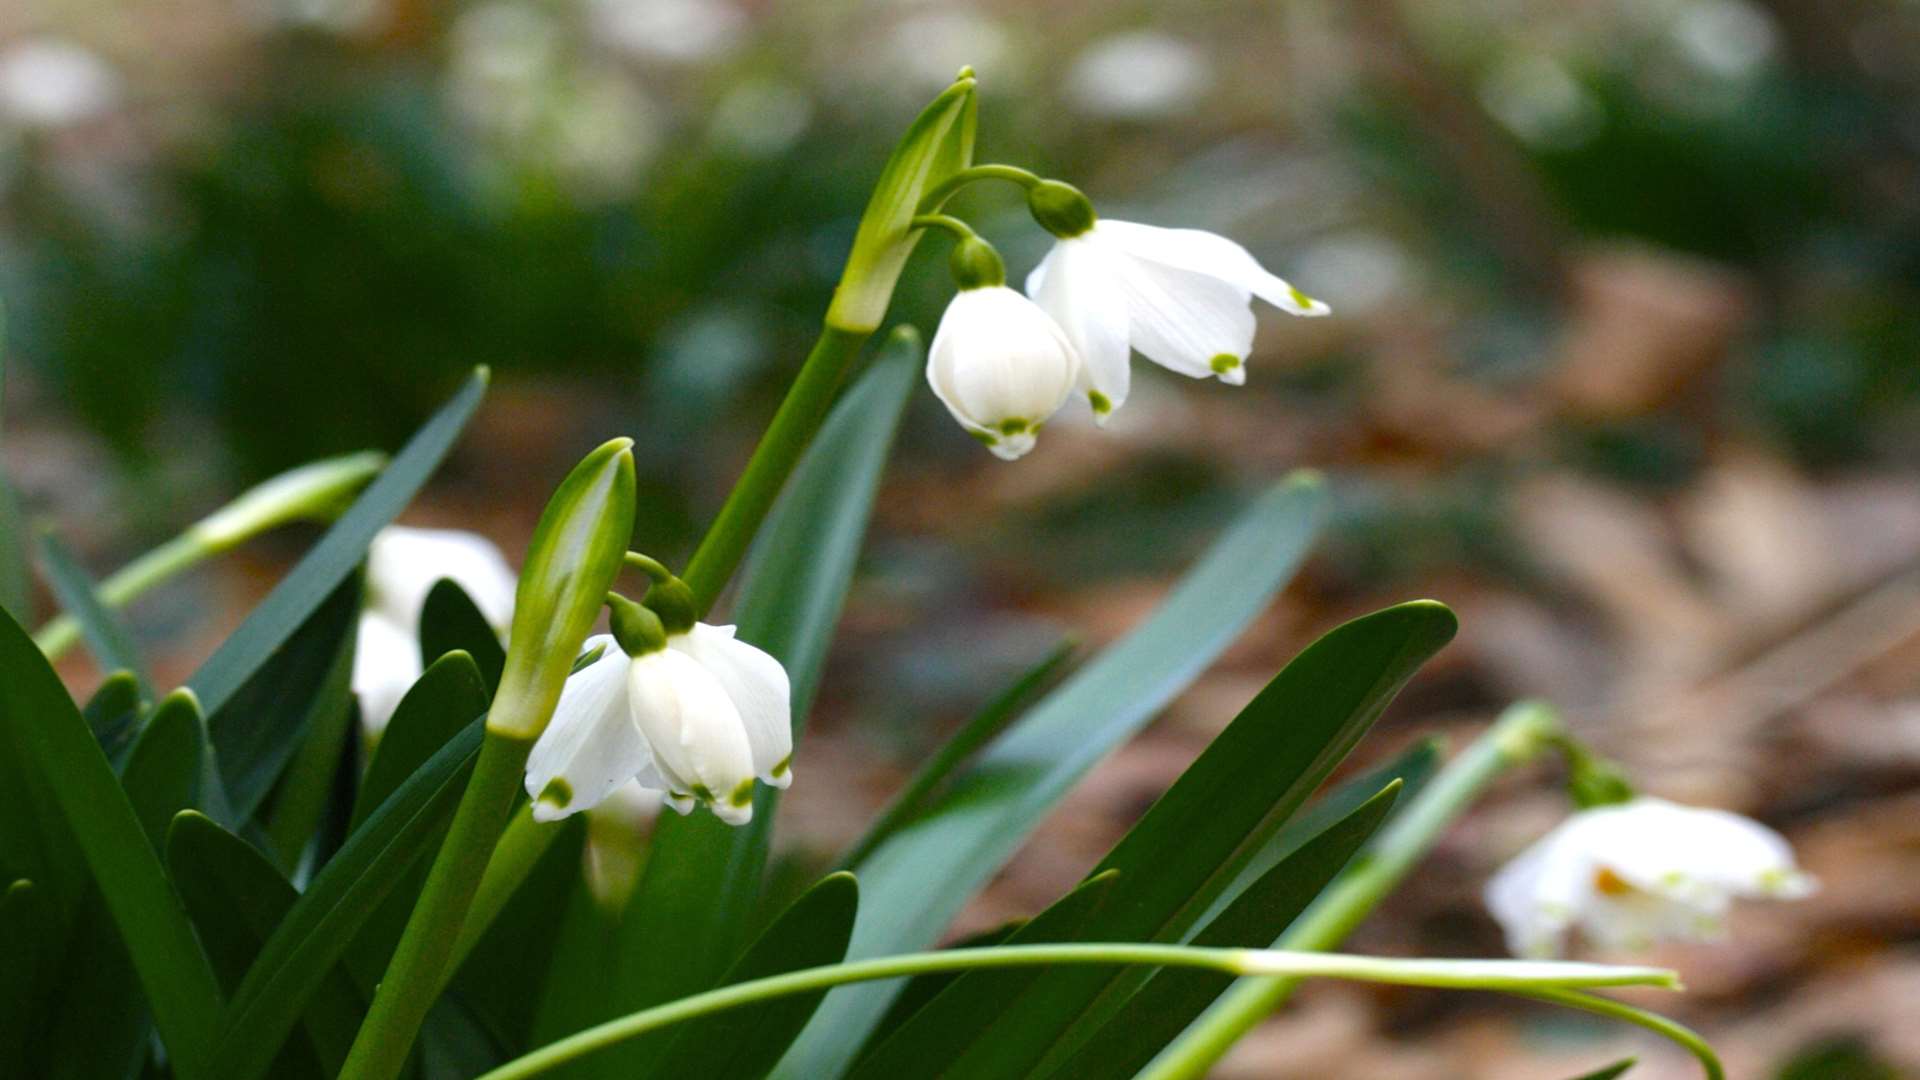 Snowdrops at Great Comp Garden